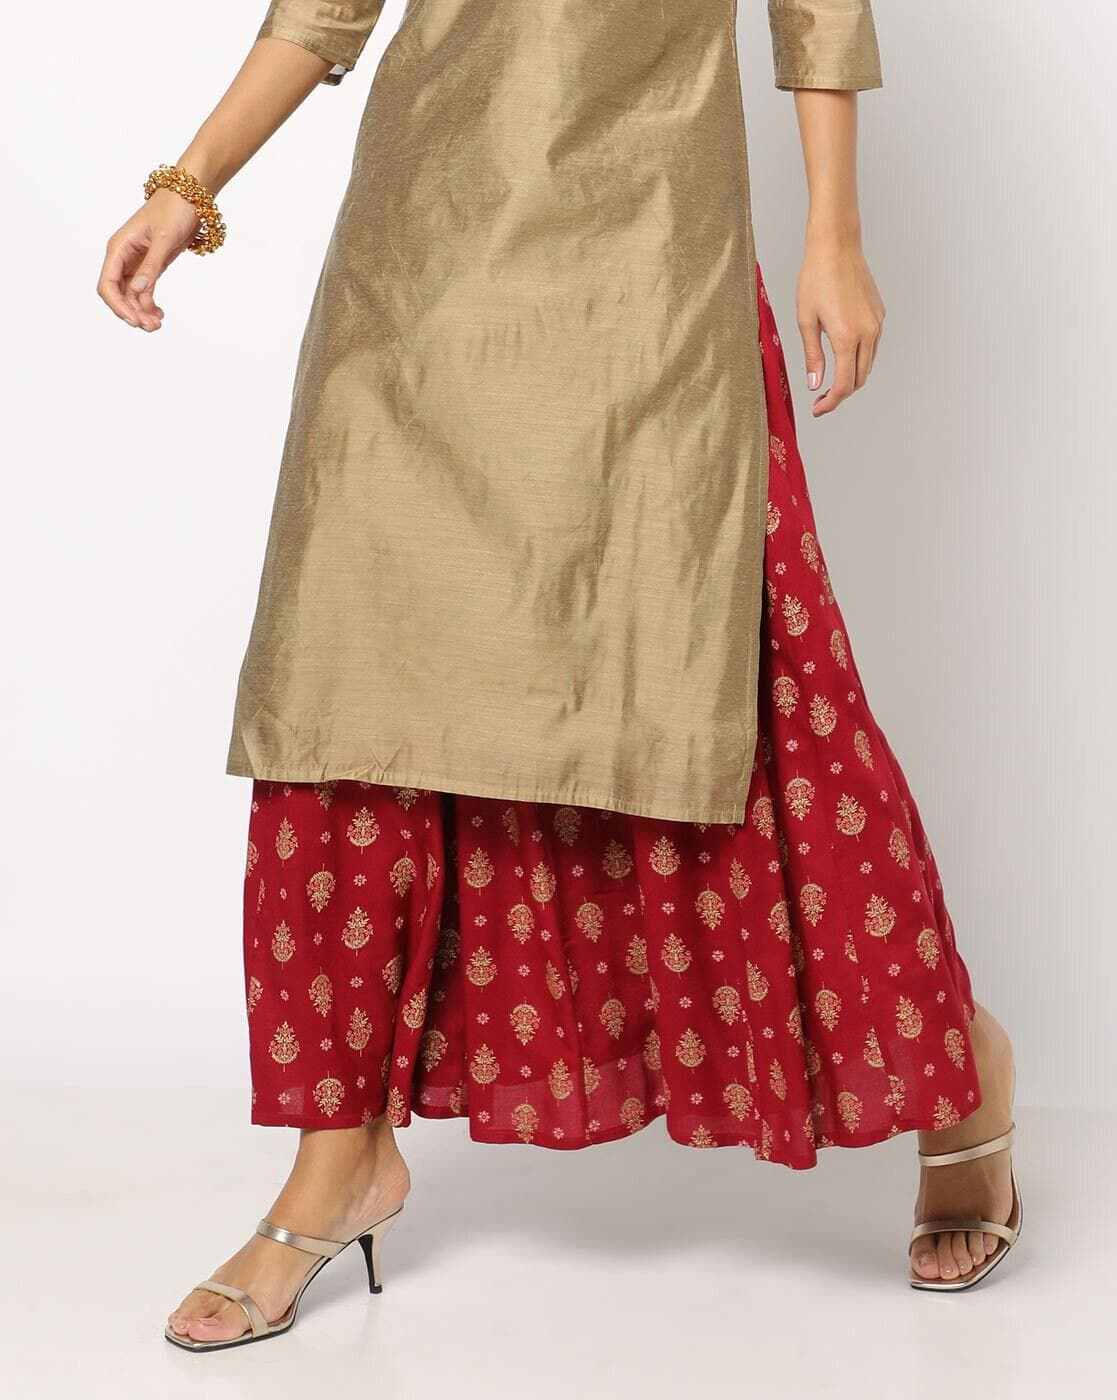 SHIVA White with Red floral Long Skirt with flair